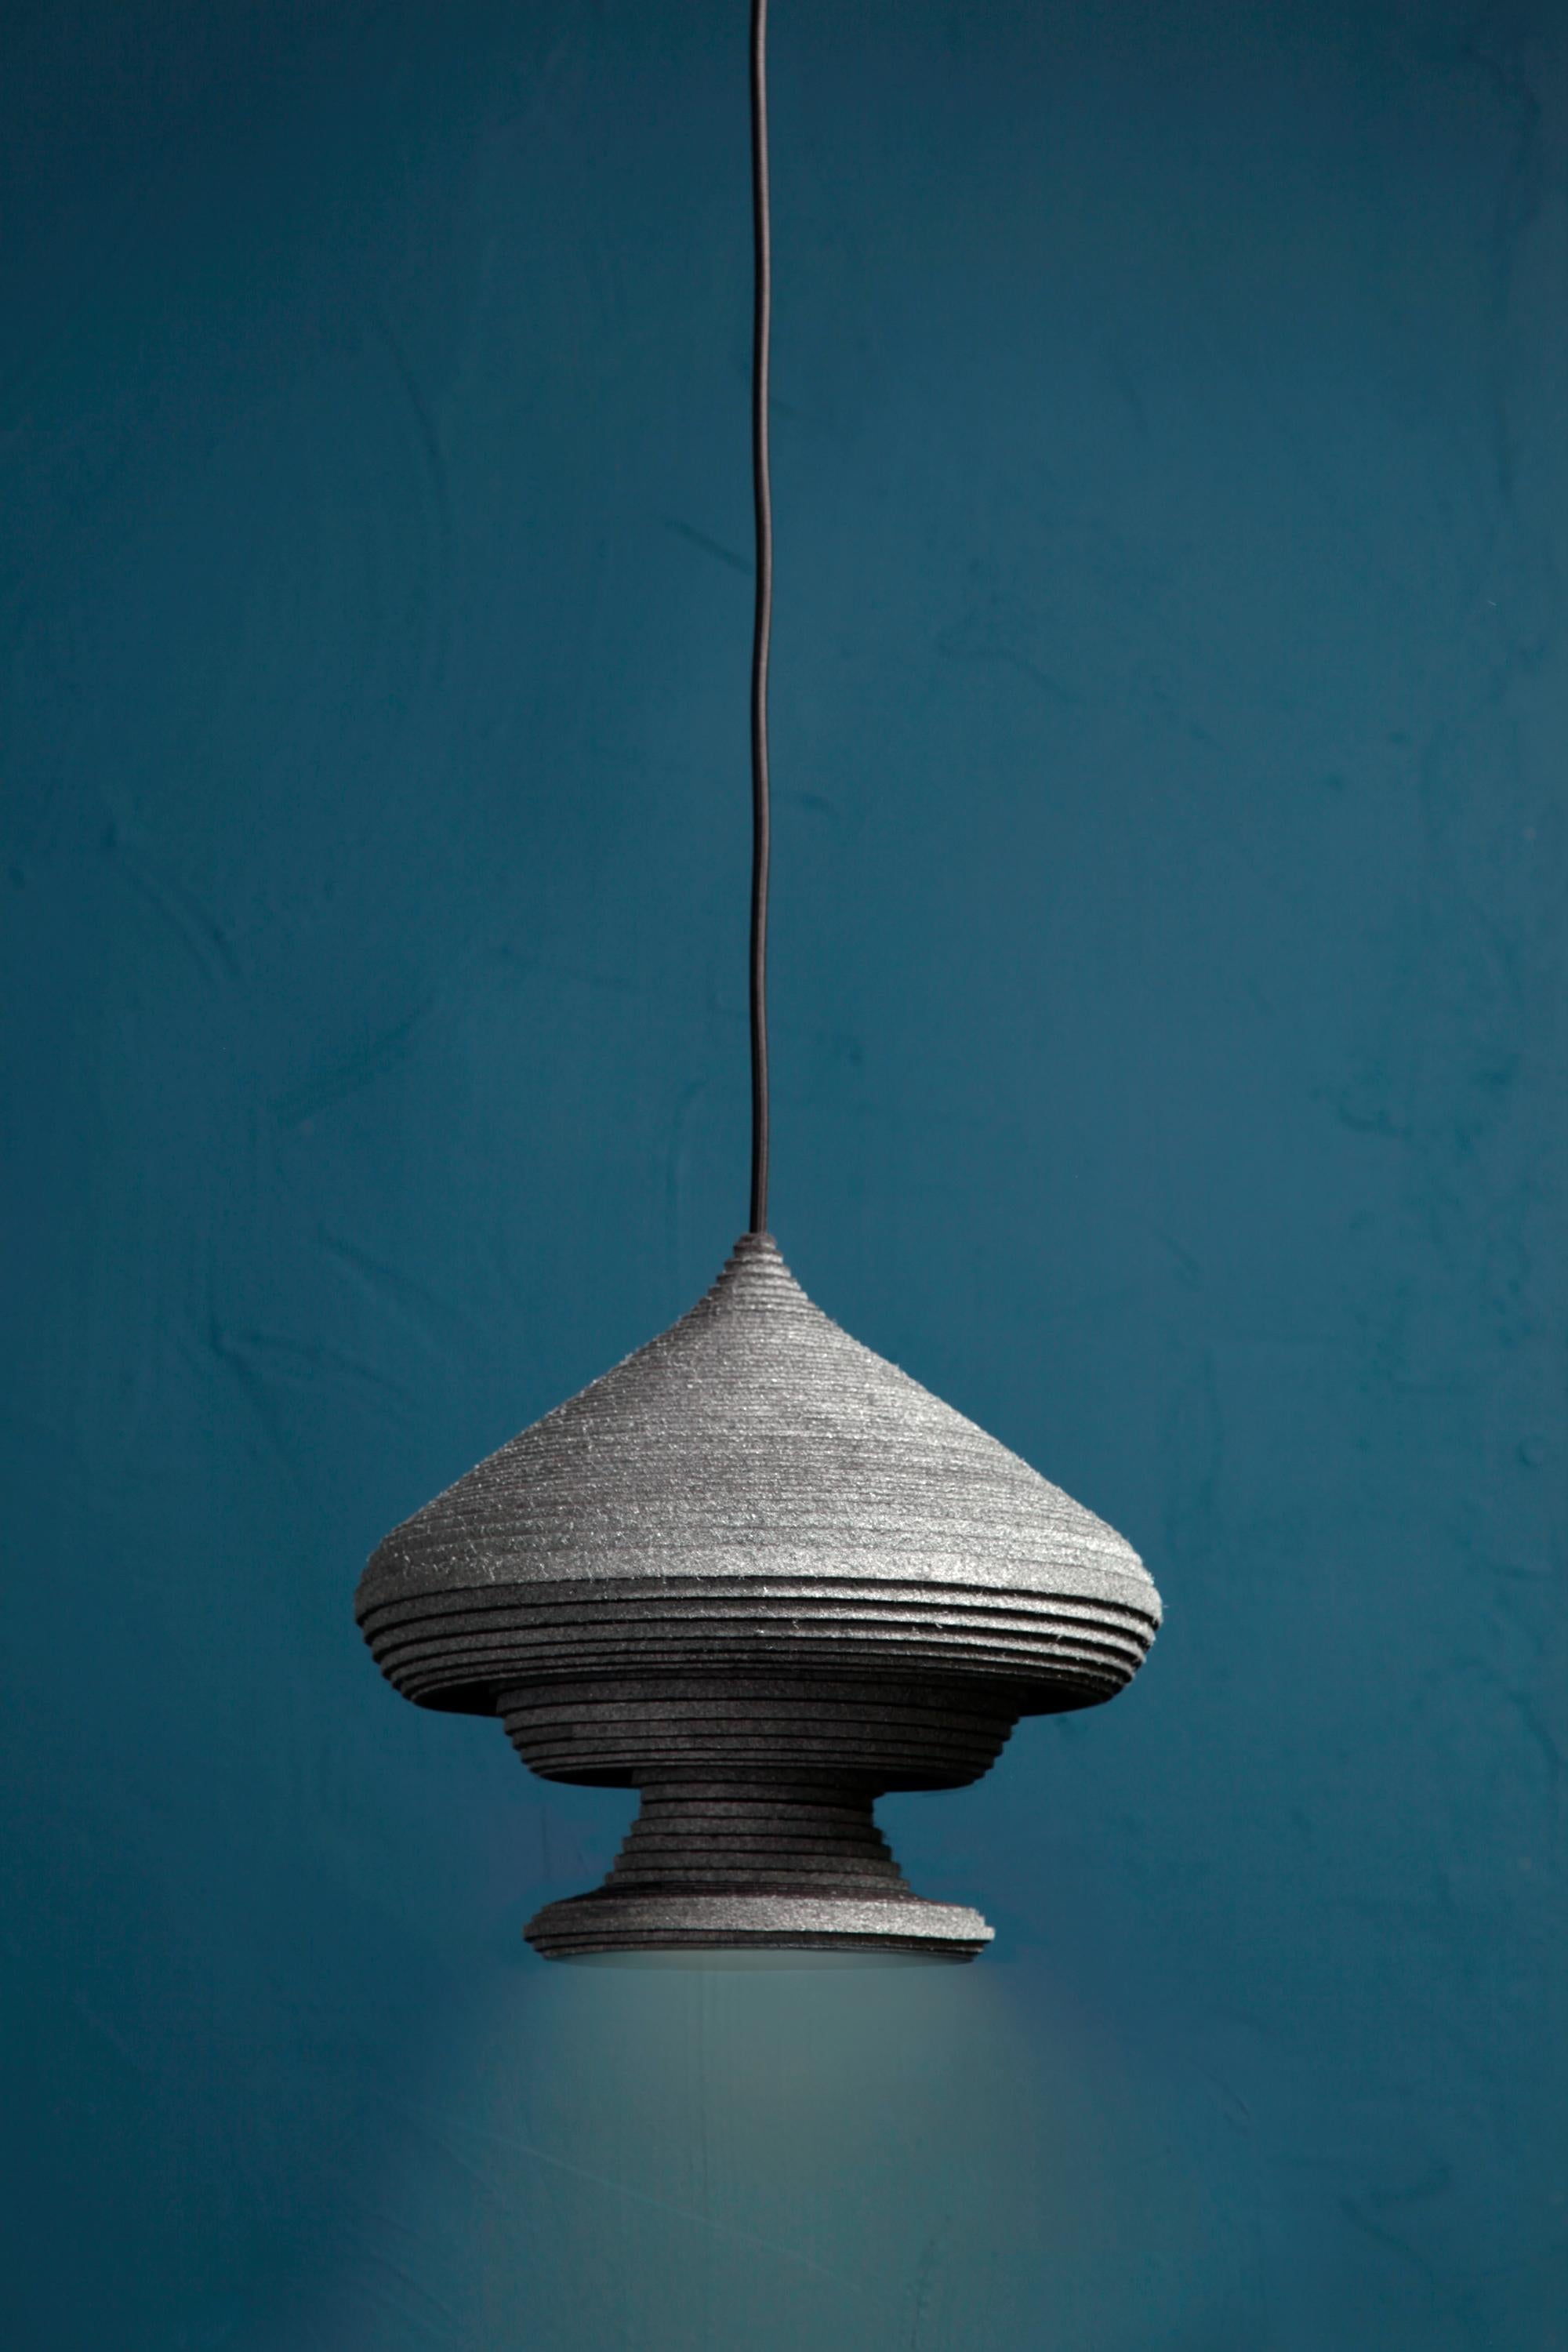 Sherazade pendant lamp by Siba Sahabi
Limited edition of: Limited edition of: 12 of each design + 2 AP + 1 P
Vase N.I: 26 x 31 x 31 cm
Signed and numbered


Inspired by nighttime silhouettes of Middle Eastern rooftops, this collection is